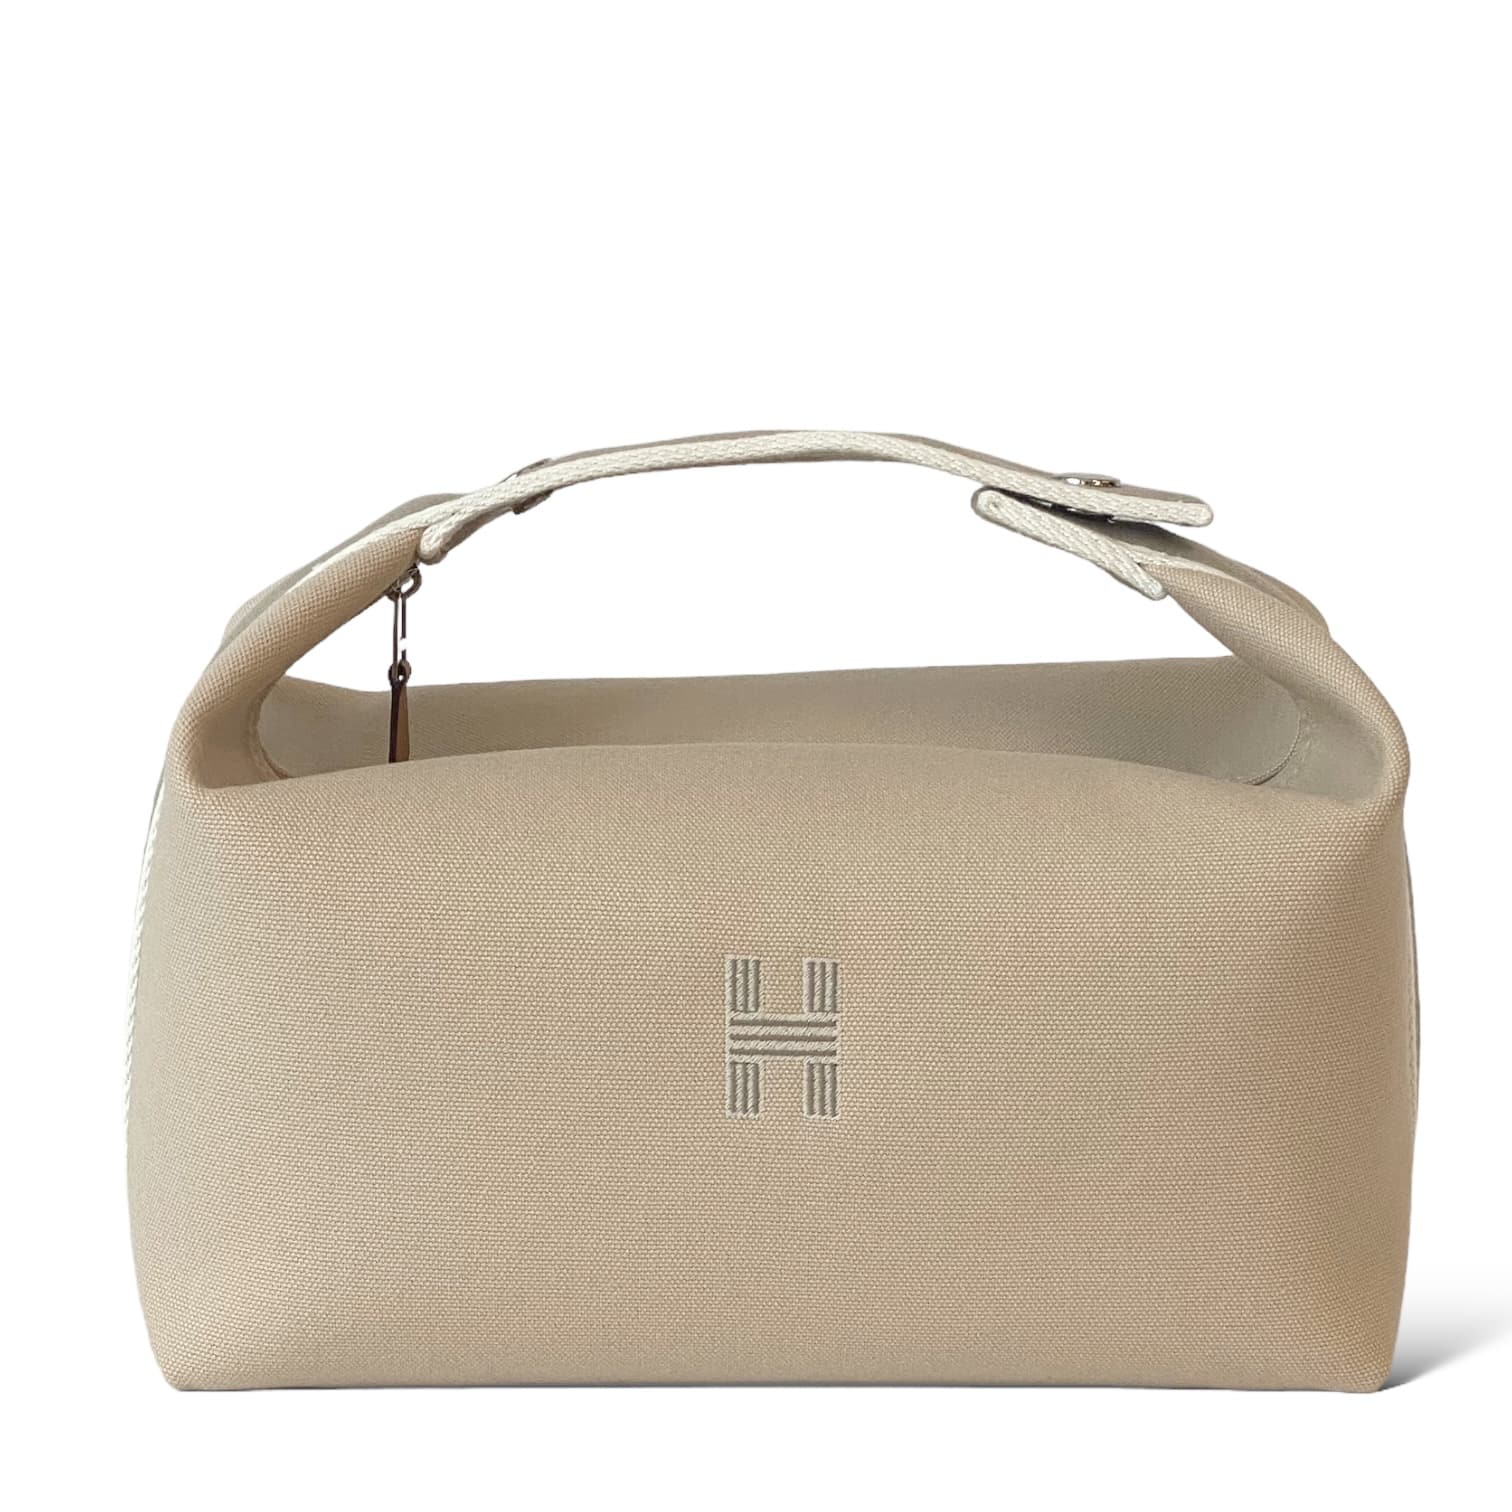 Sold at Auction: HERMES BRIDE-A-BRAC CASE IN CREAM